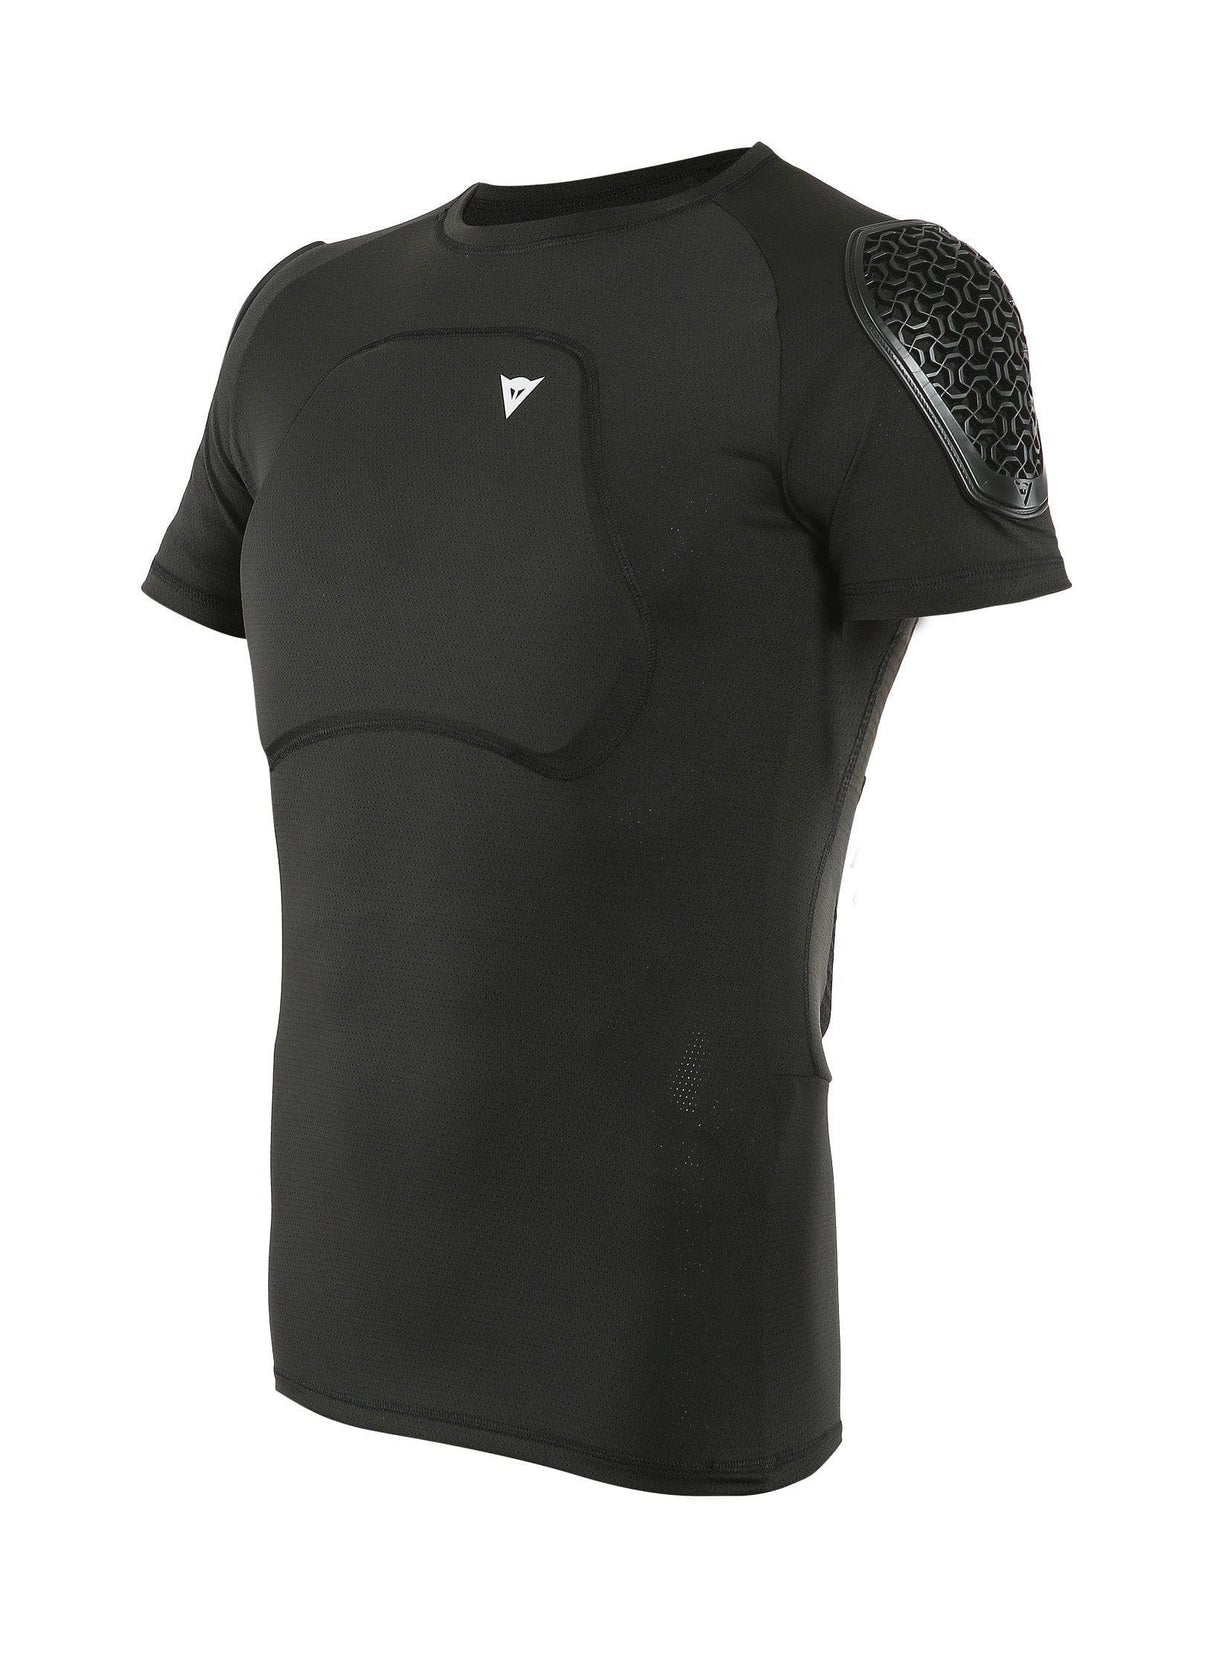 Dainese Trail Skins Pro Tee Armour (Black, M)